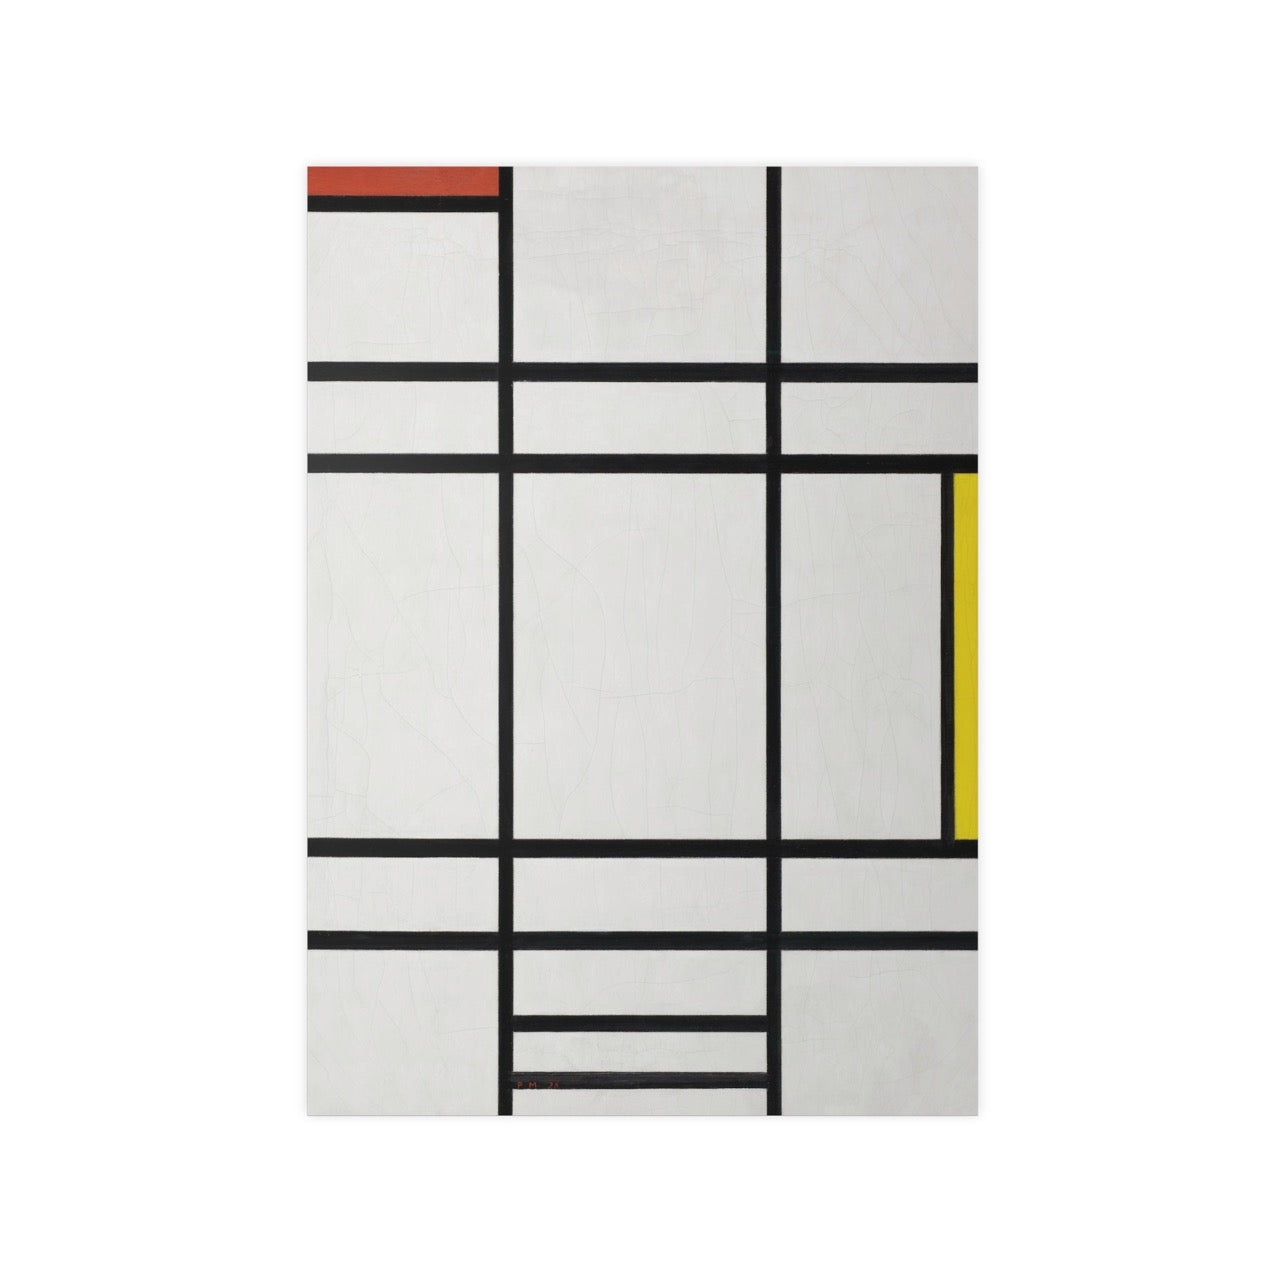 Piet Mondrian Fine Art Print - Composition in White, Red, and Yellow (1936)